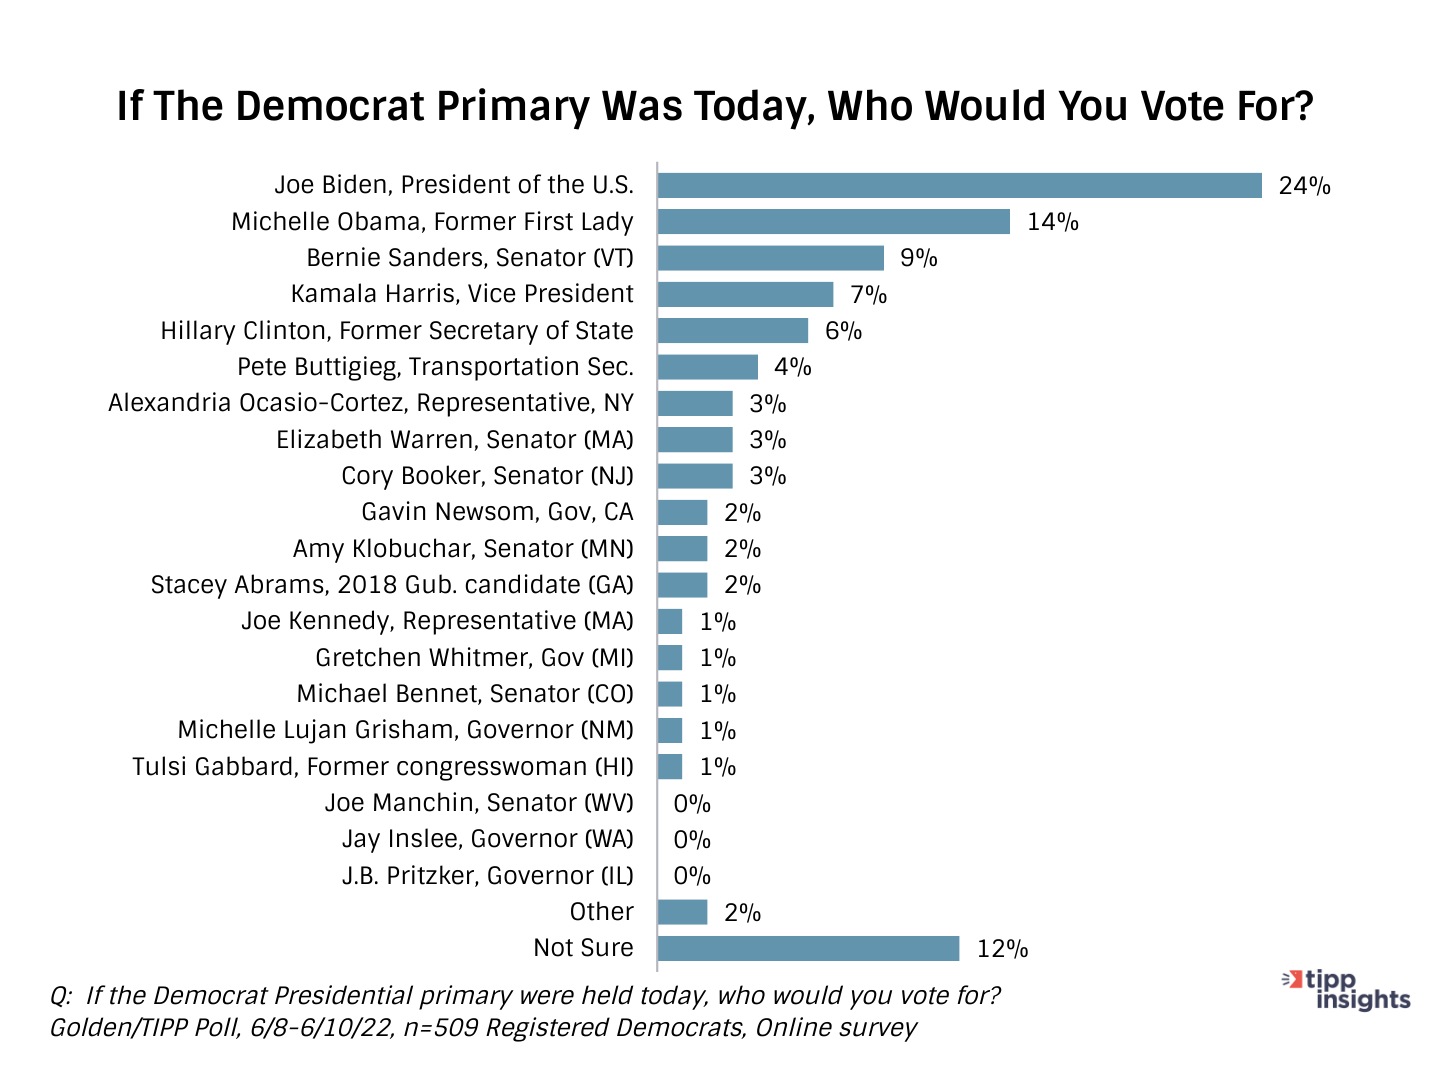 Golden/TIPP Poll Results: If the democrat primary was today who would you vote for